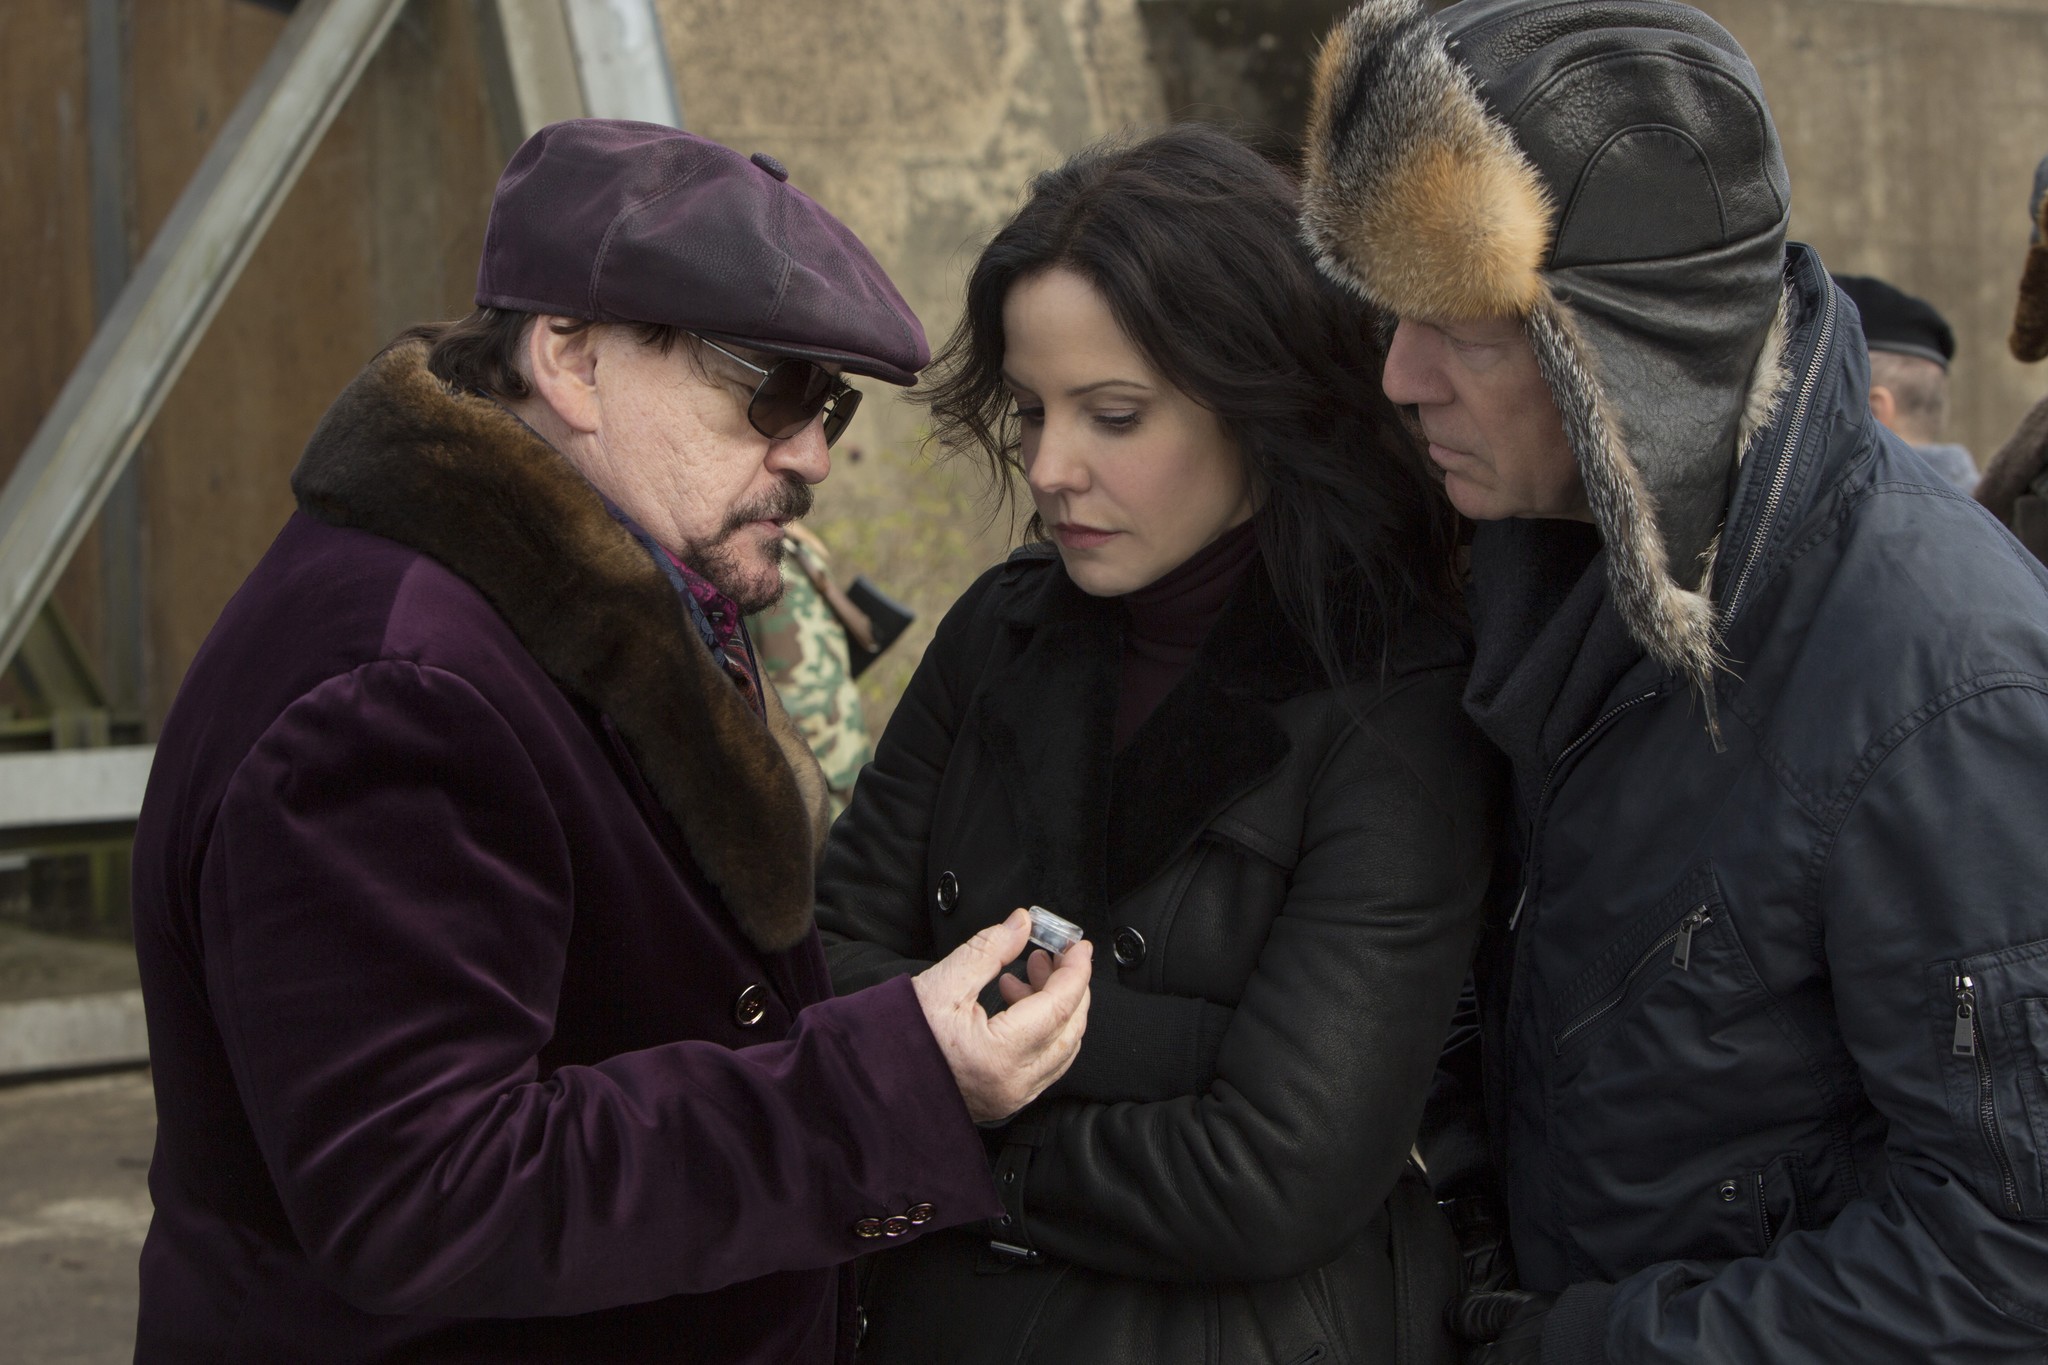 movie, red 2, brian cox, bruce willis, frank moses, ivan simanov, mary louise parker, sarah ross